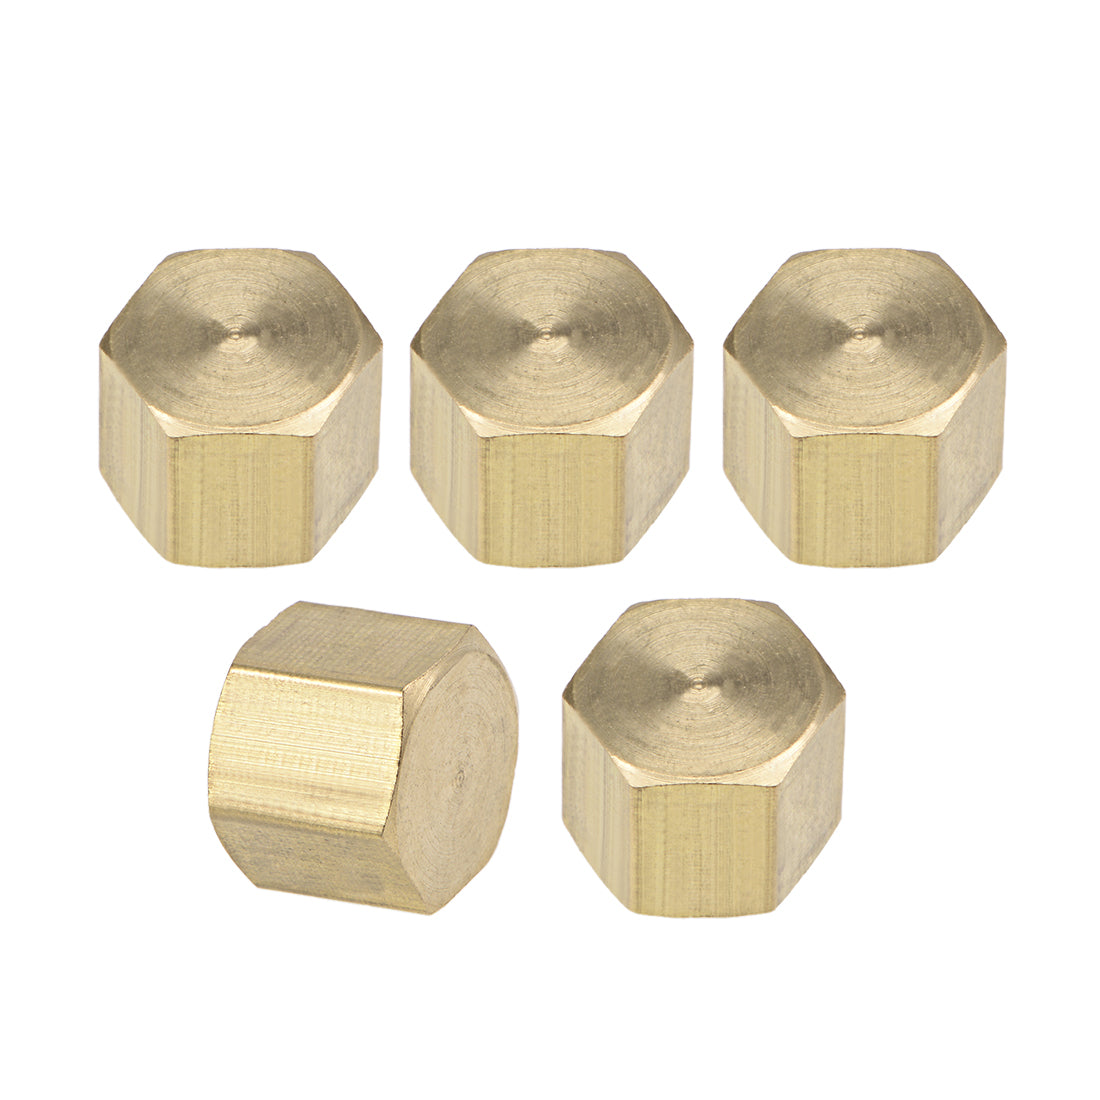 uxcell Uxcell Brass Cap, 5pcs 1/8PT Female Pipe Fitting Hex Compression Stop Valve Connector 11x11mm